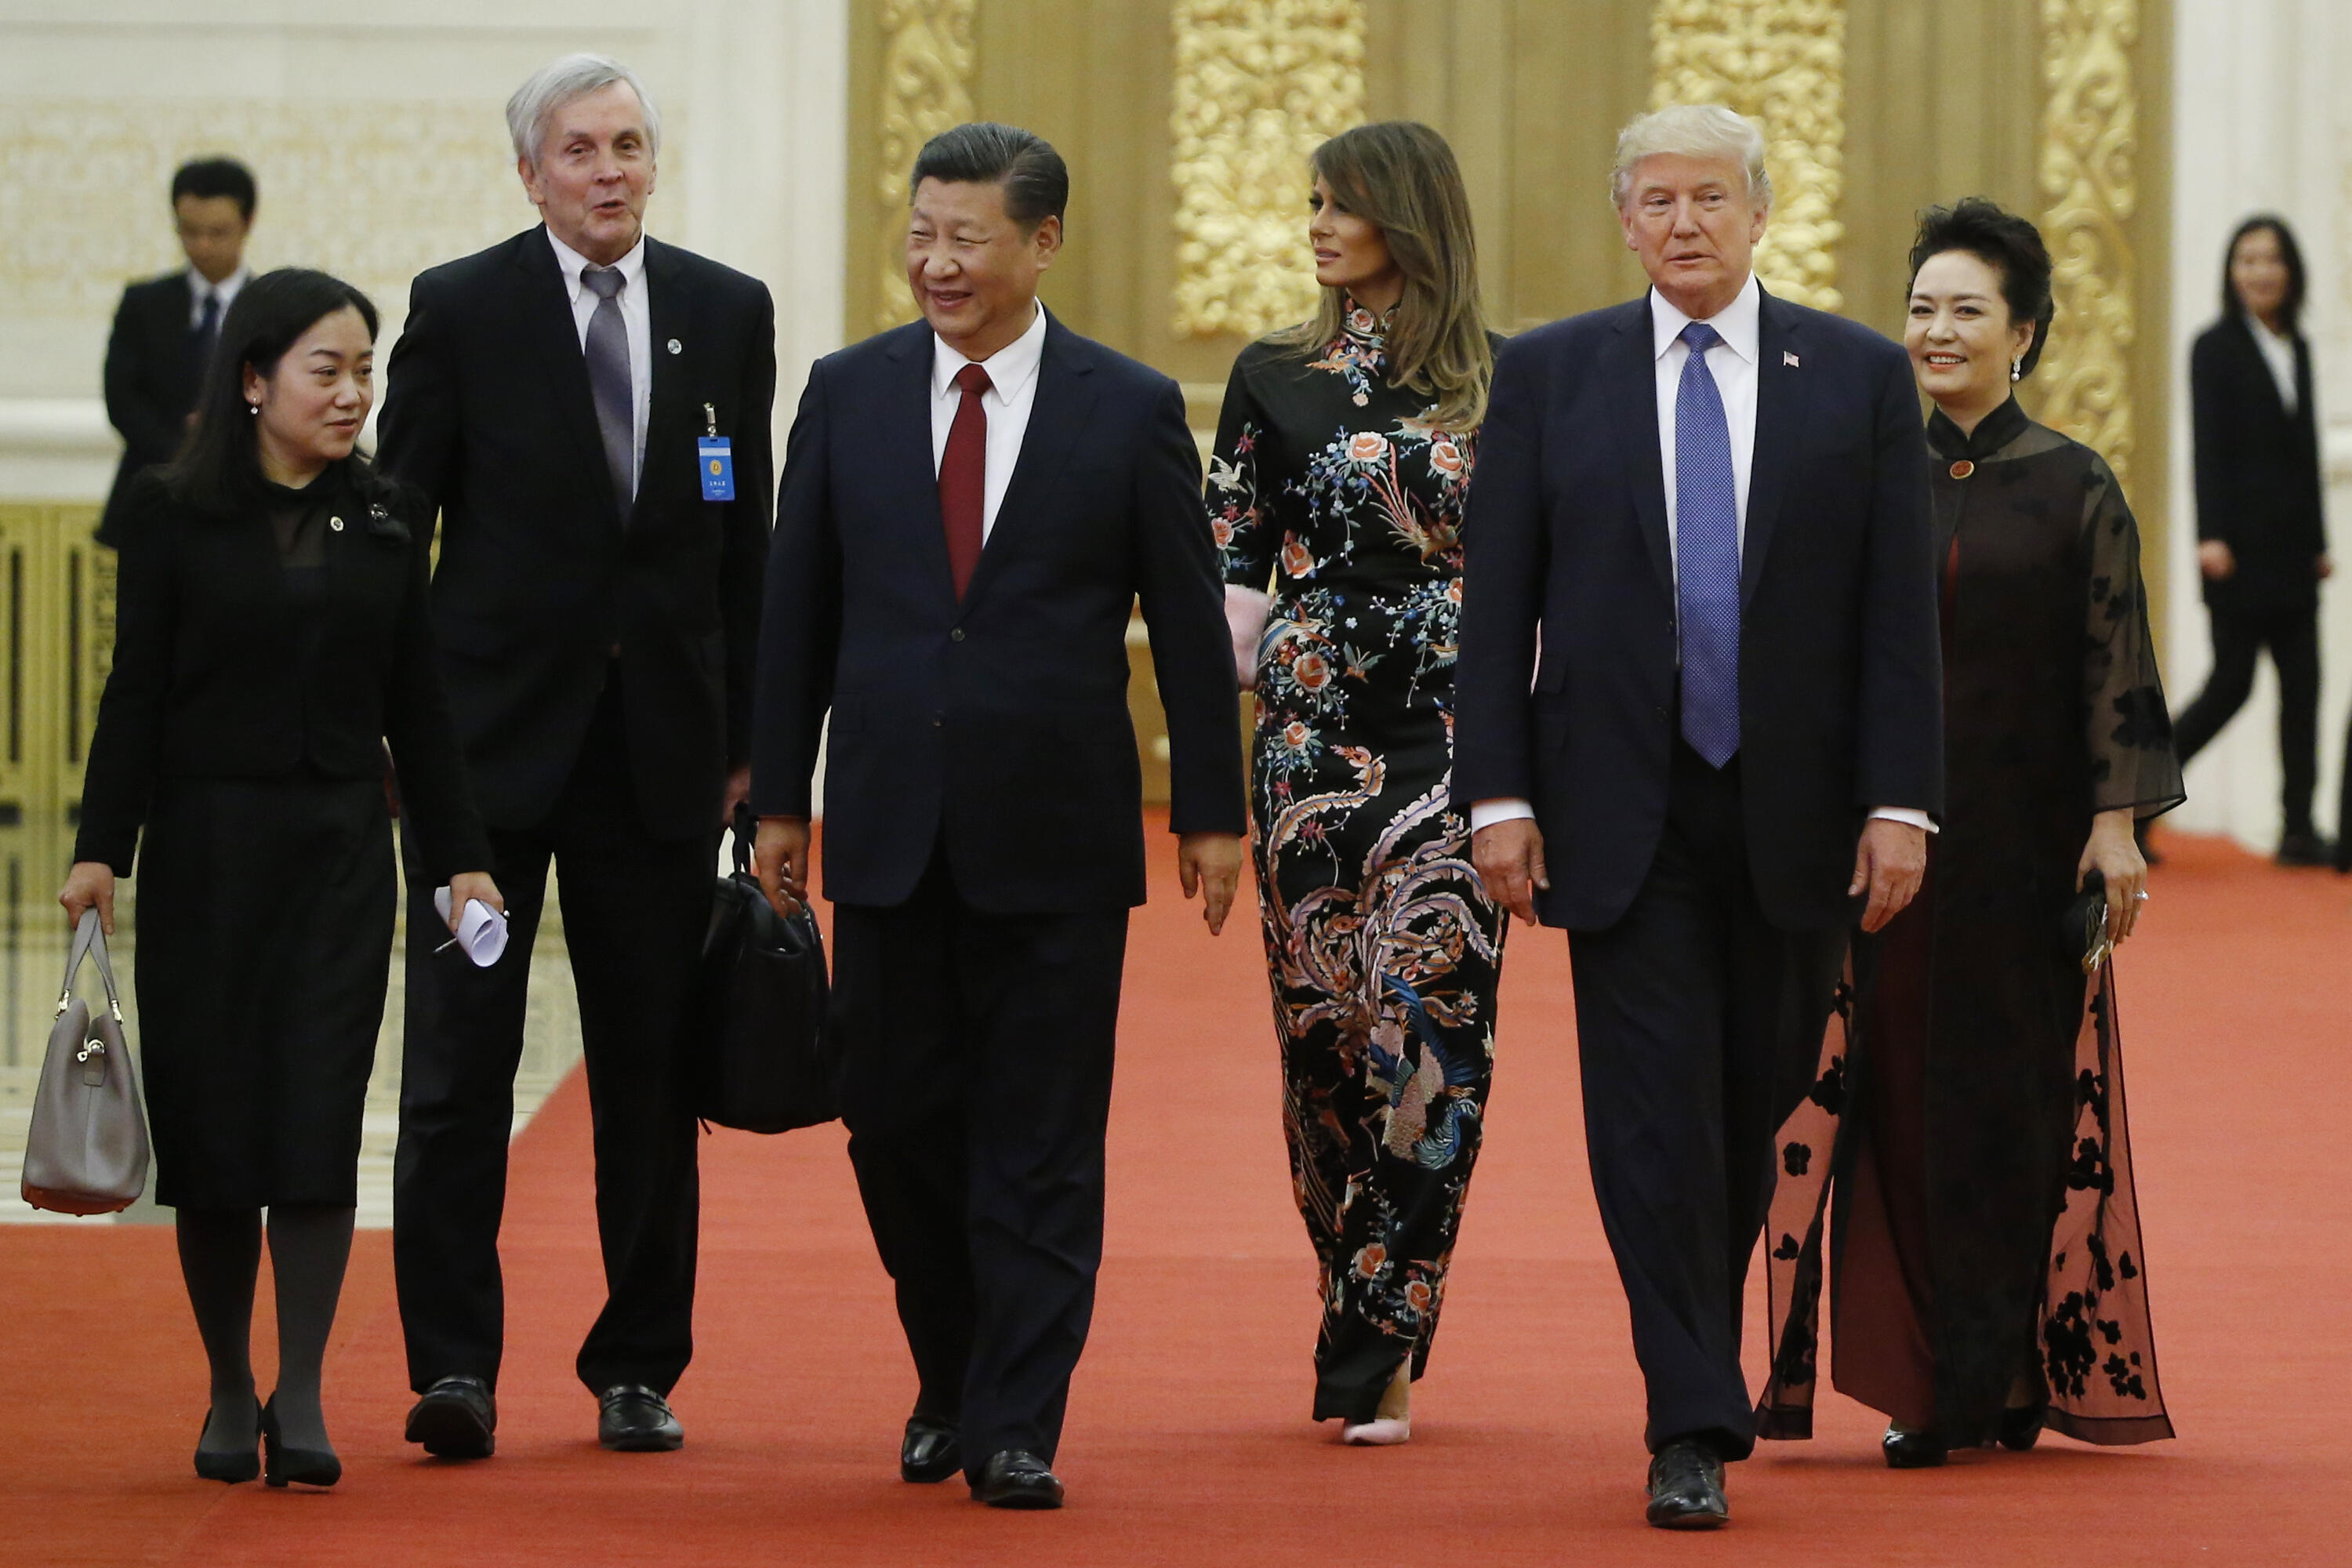 US President Donald Trump (2nd R) and First Lady Melania Trump (3rd R) arrive for a state dinner with China's President Xi Jinping (3rd L) and his wife Peng Liyuan (R) at the Great Hall of the People in Beijing on November 9, 2017. Donald Trump urged Chinese leader Xi Jinping to work hard and act fast to help resolve the North Korean nuclear crisis during talks in Beijing Thursday, warning that 'time is quickly running out'. / AFP PHOTO / POOL / THOMAS PETER (Photo credit should read THOMAS PETER/AFP/Getty Images)